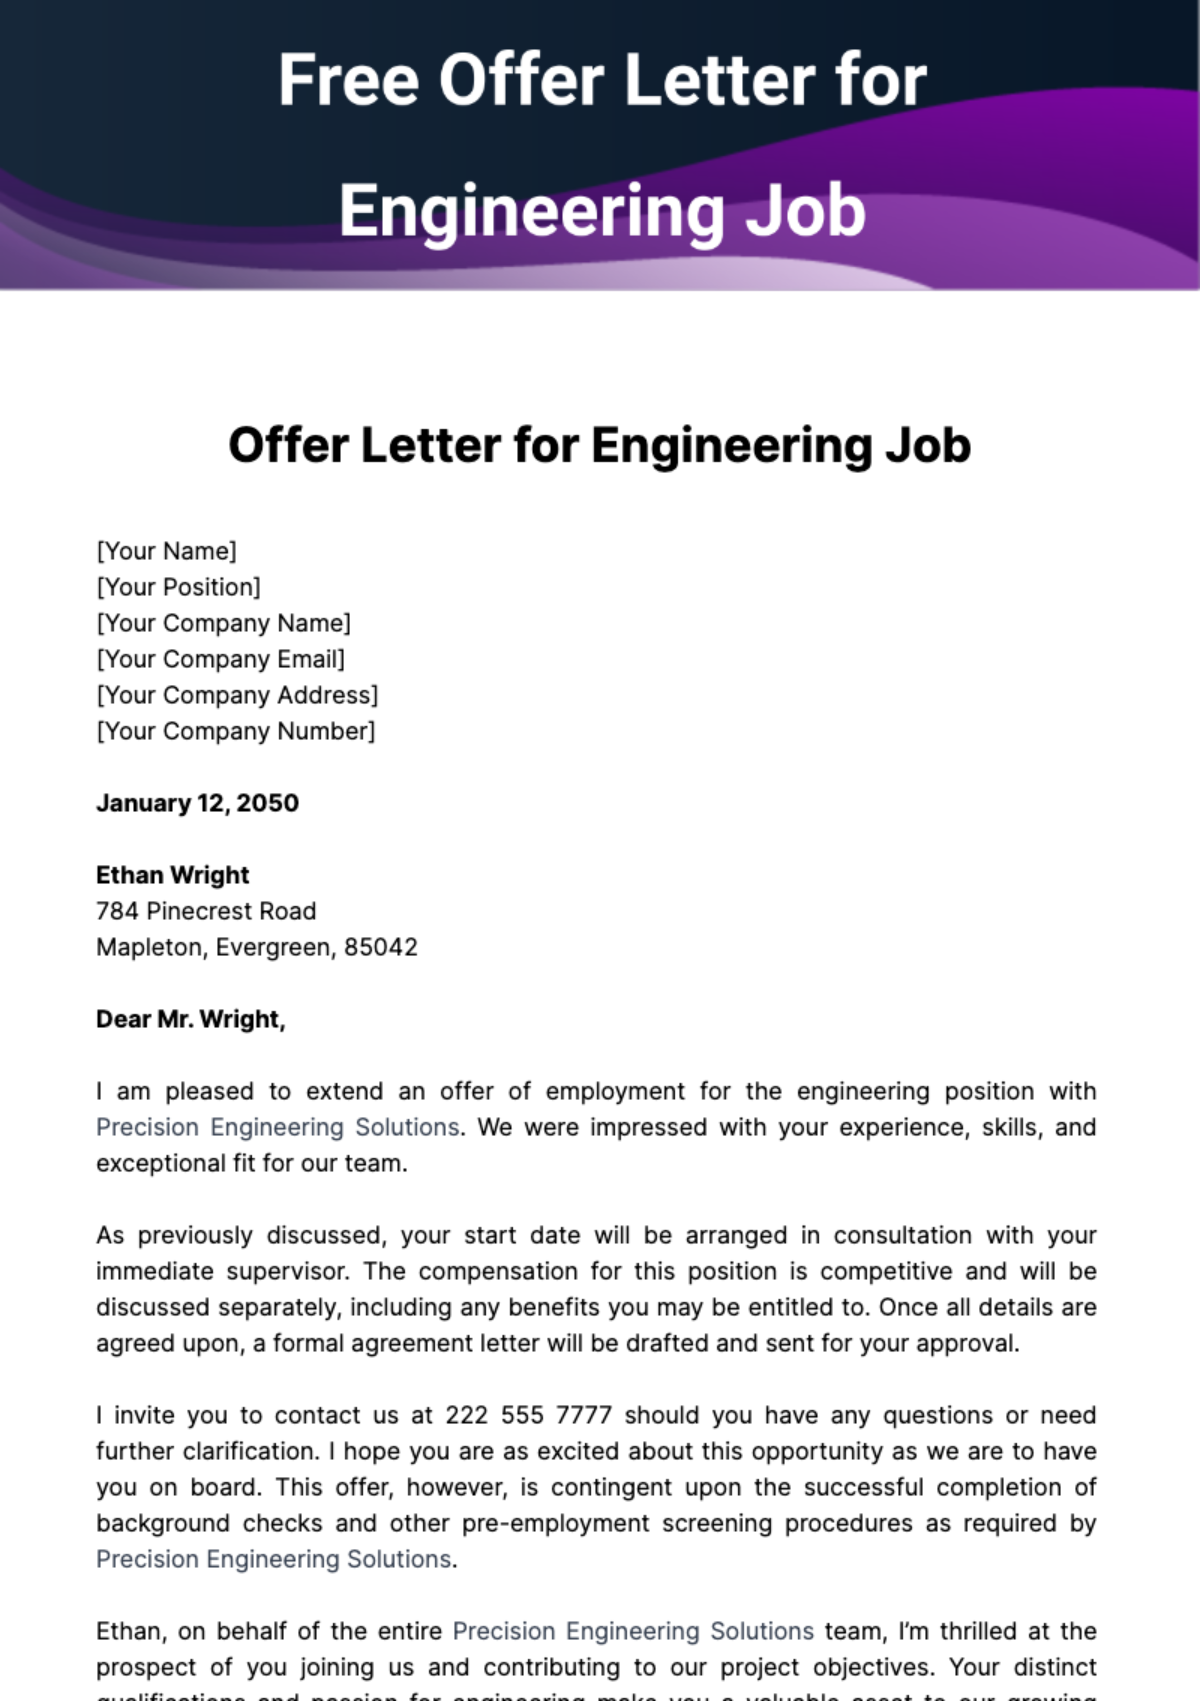 Free Offer Letter for Engineering Job Template